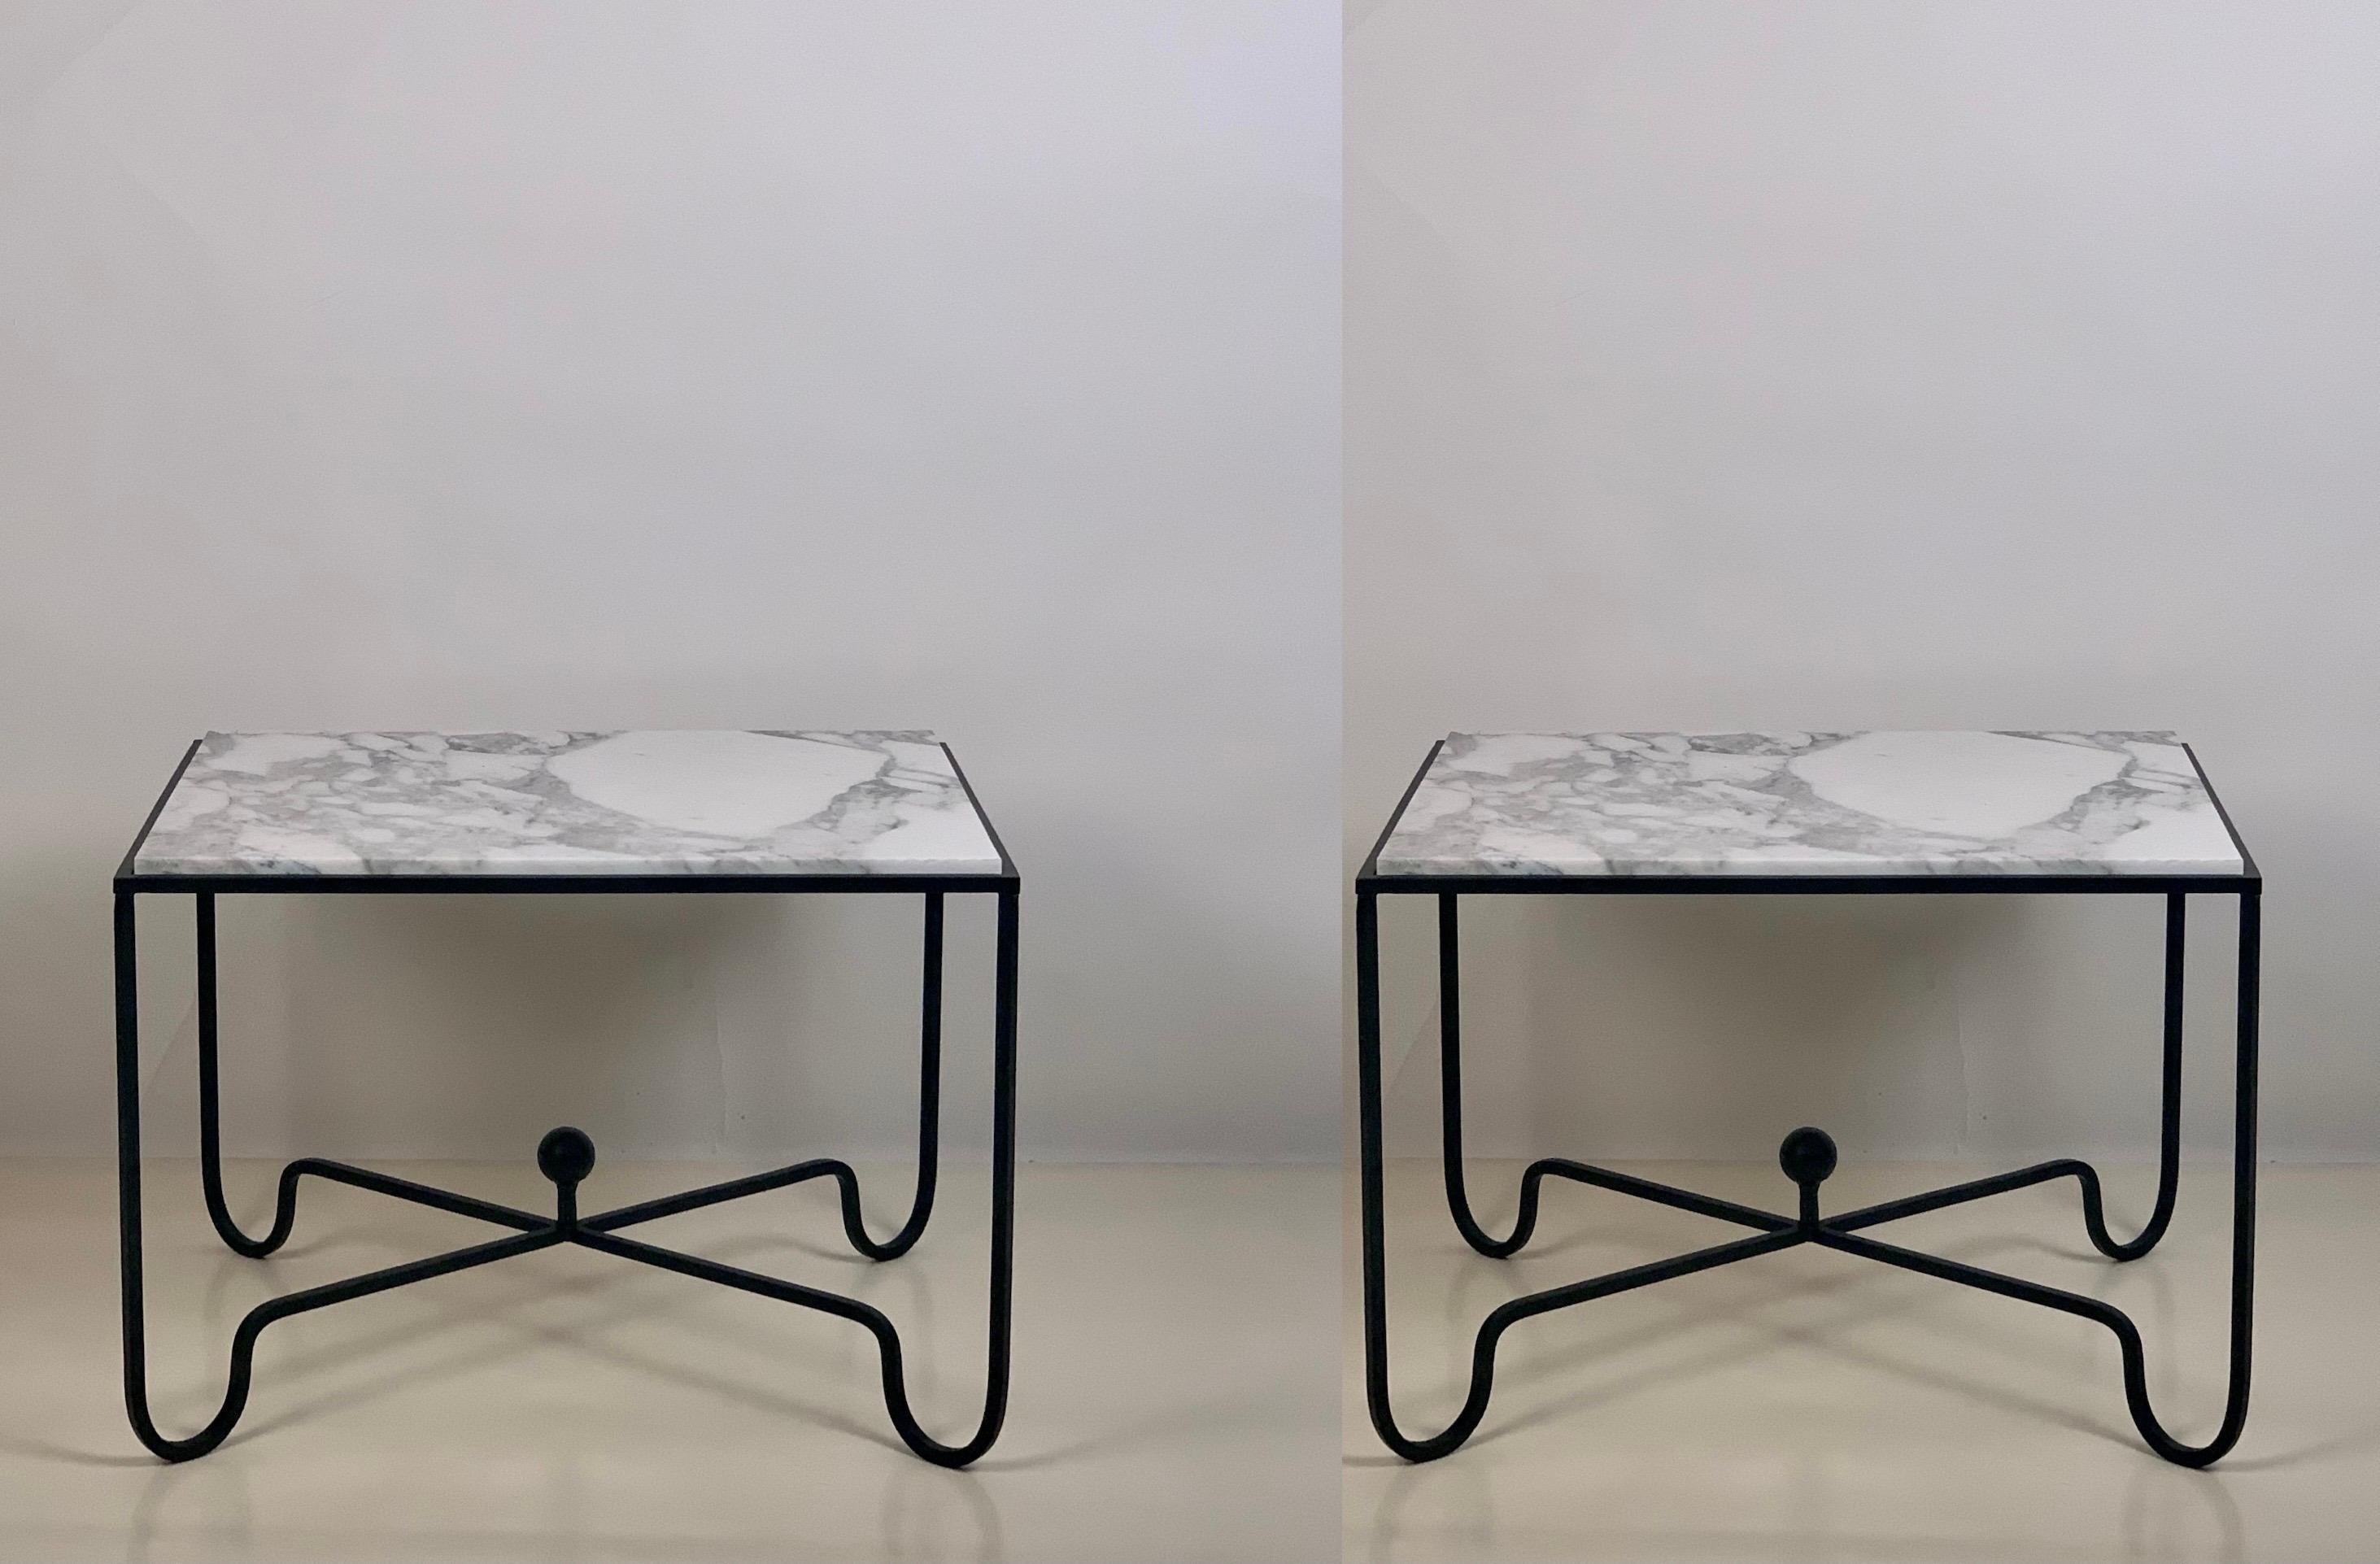 Pair of extra large 'Entretoise' Arabescato marble side or end tables by Design Frères.